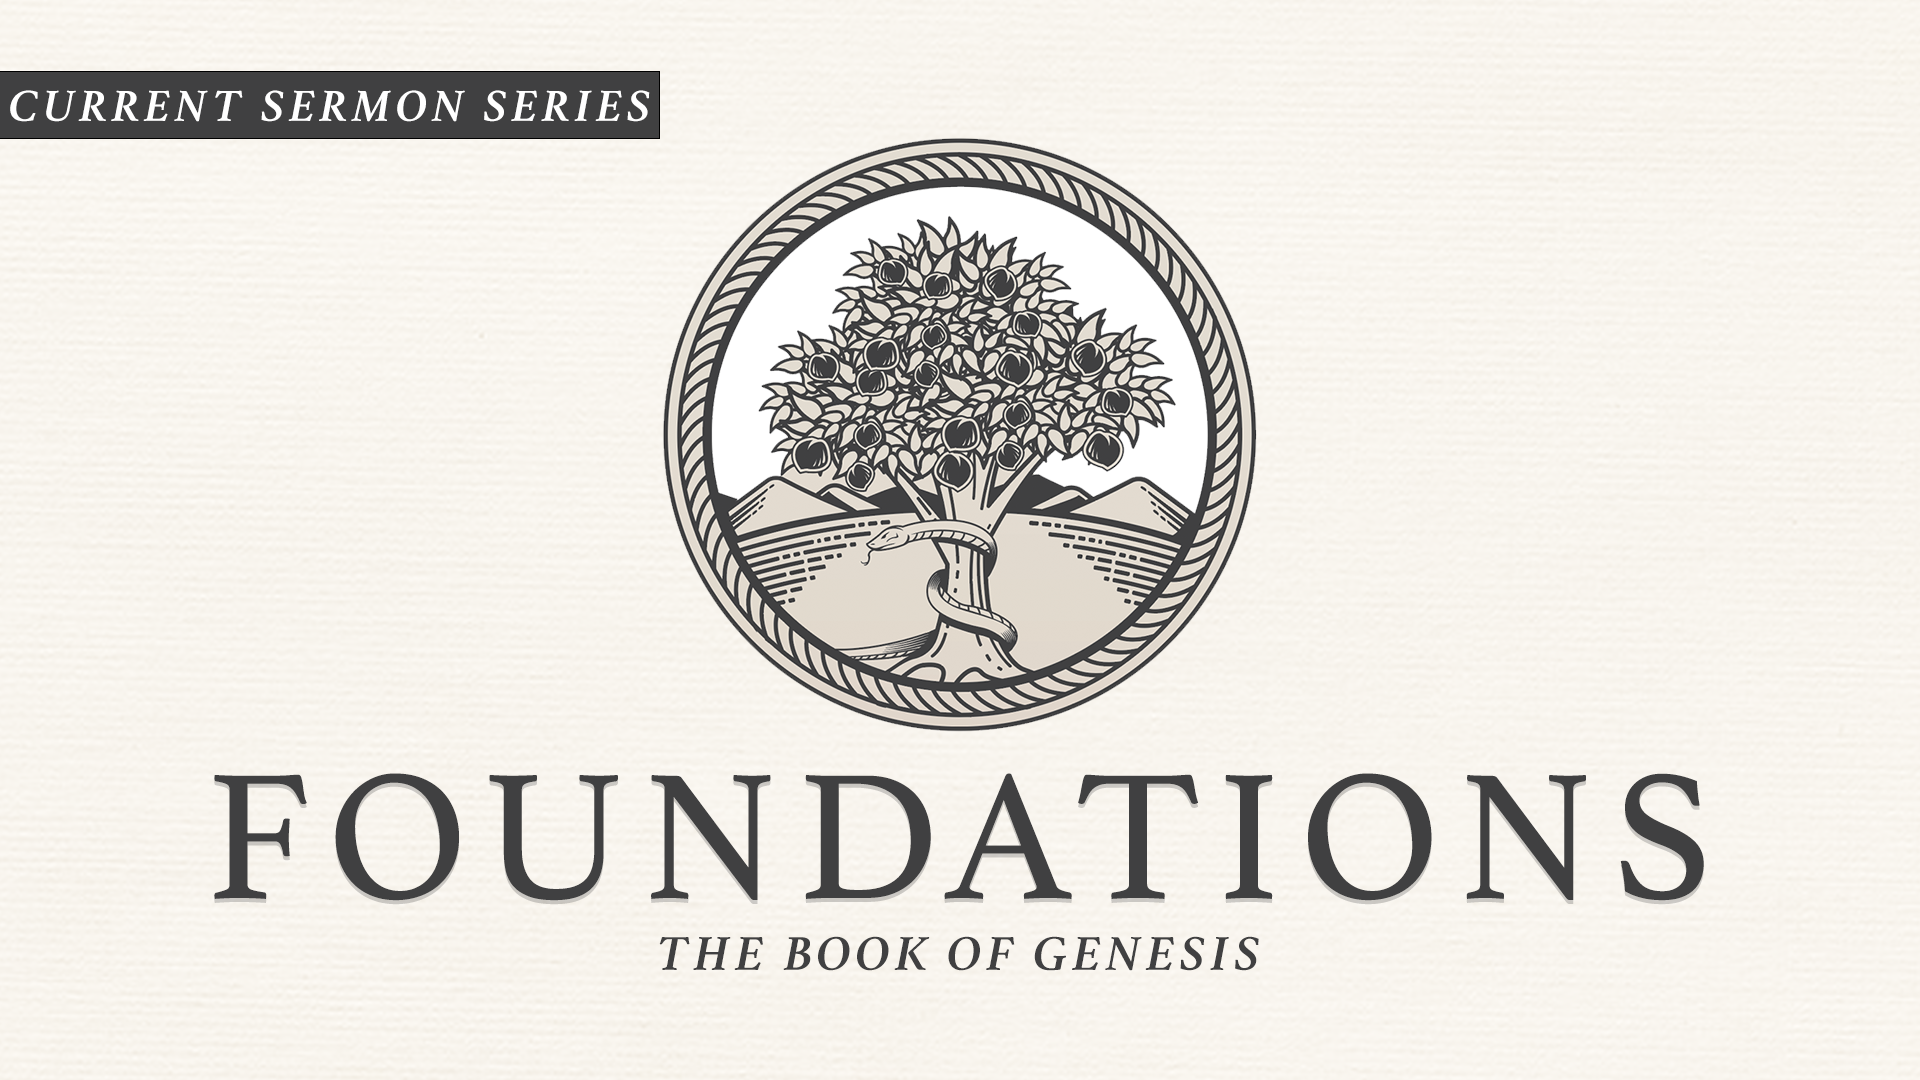 Featured image for “Foundations”